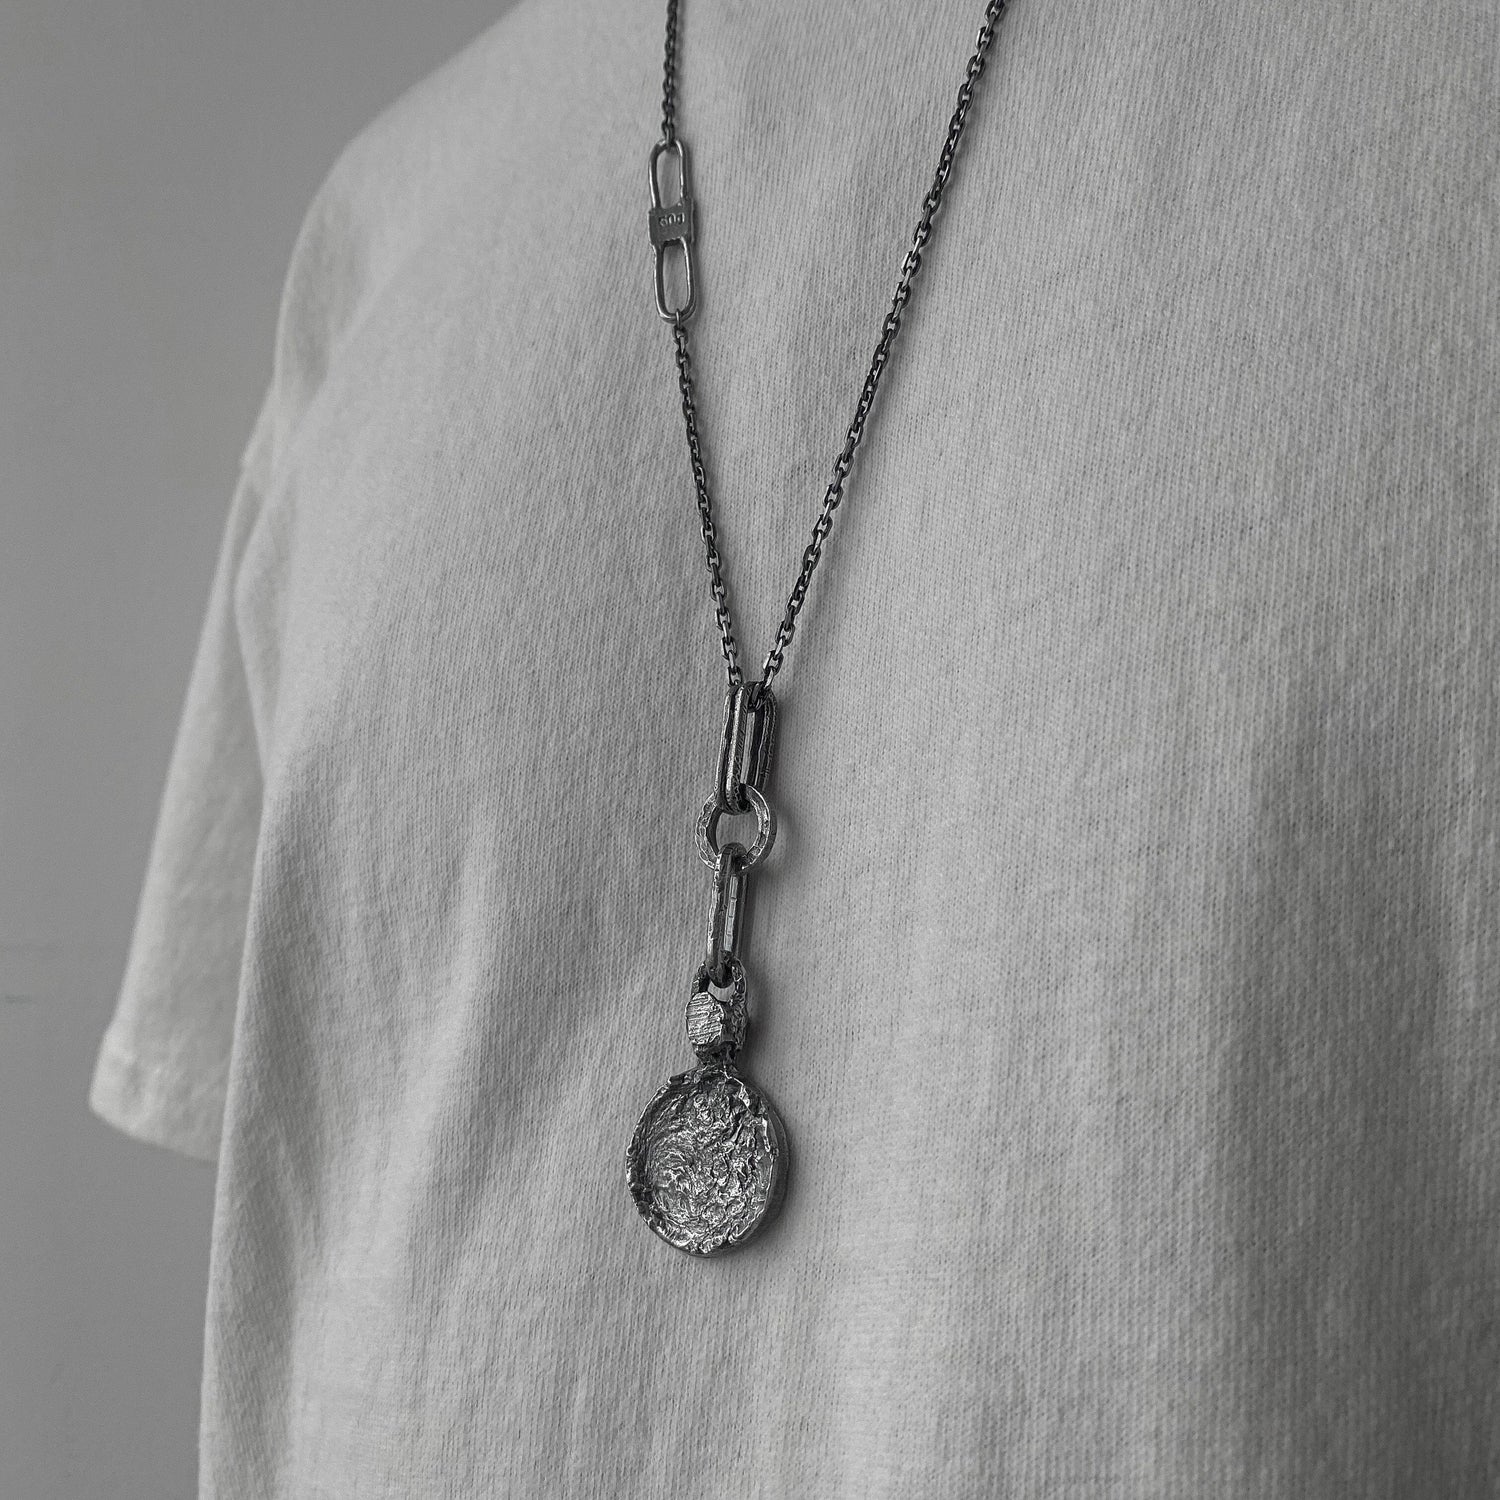 Tempus pendant-textured round pendant with unusual handmade link combination and black chain Charms & Pendants Project50g 